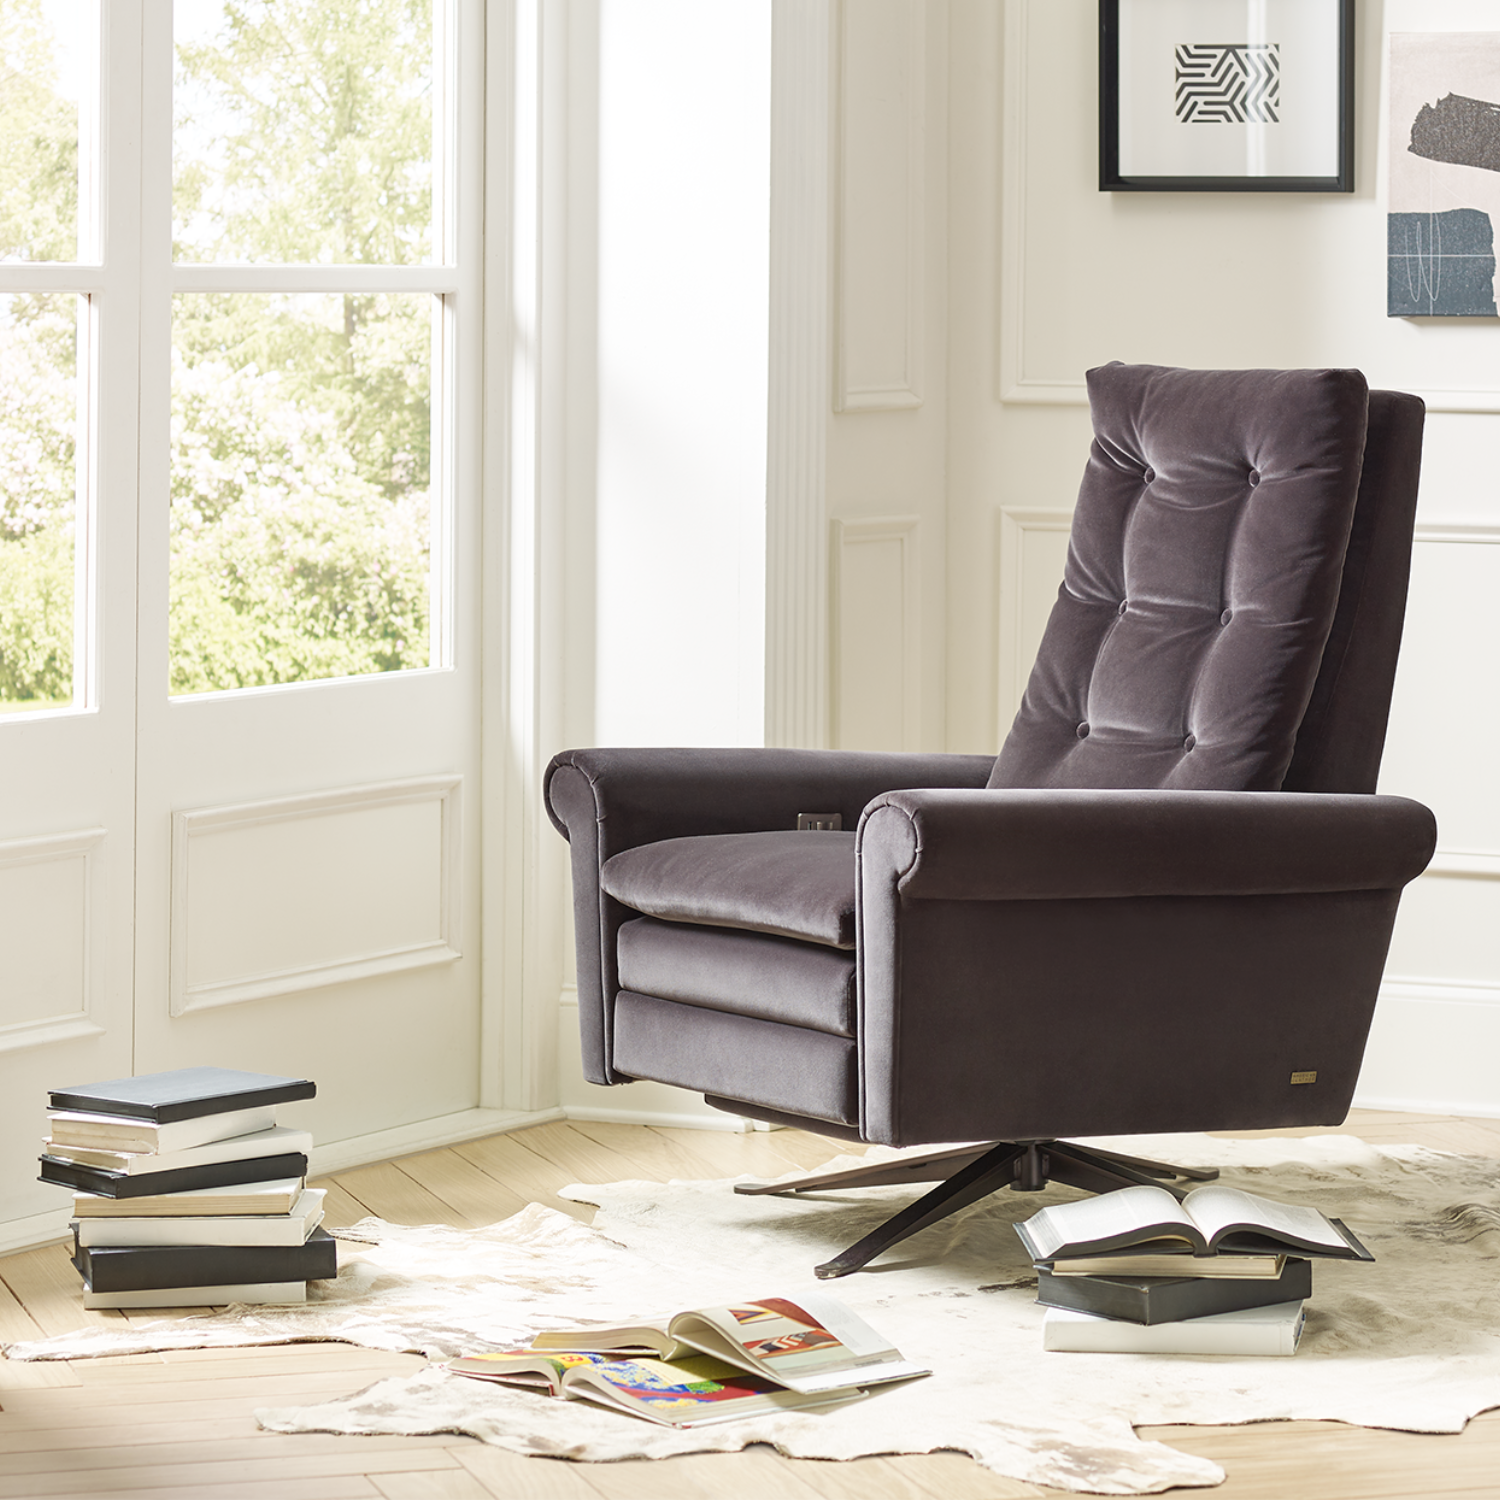 The Reinvented Recliner, by American Leather, is a beautiful chair that functions as a space efficient comfortable recliner that is easy on the eye as well. 